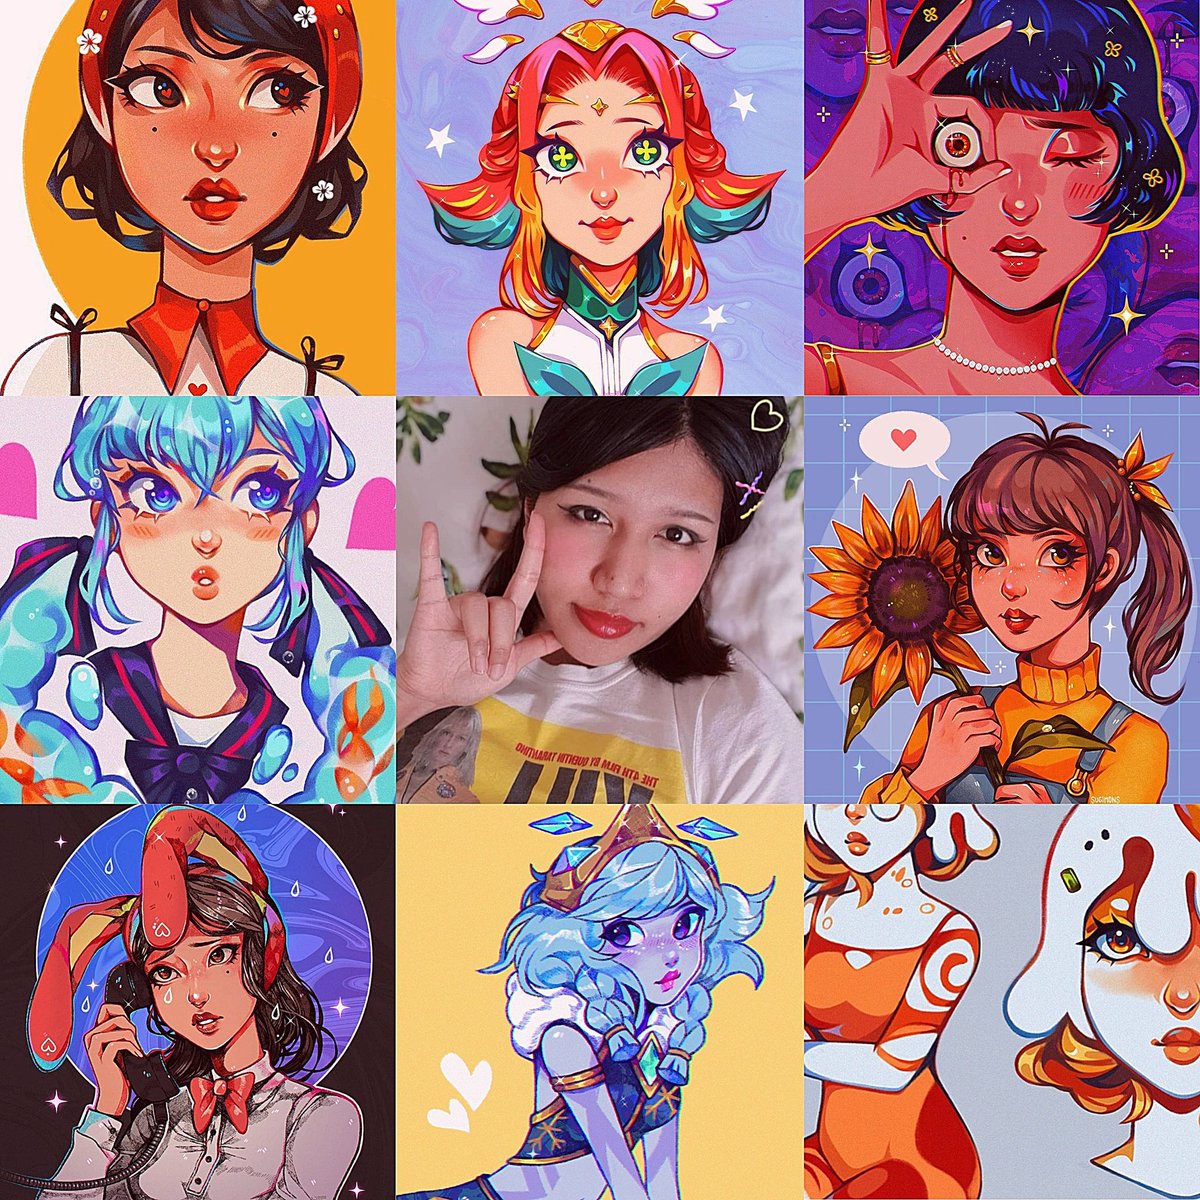 hello! ( ・᷄ὢ・᷅ ) I'm Annie and this is my style i'm developing ? 

#artvsartists2020 #artvsartist 